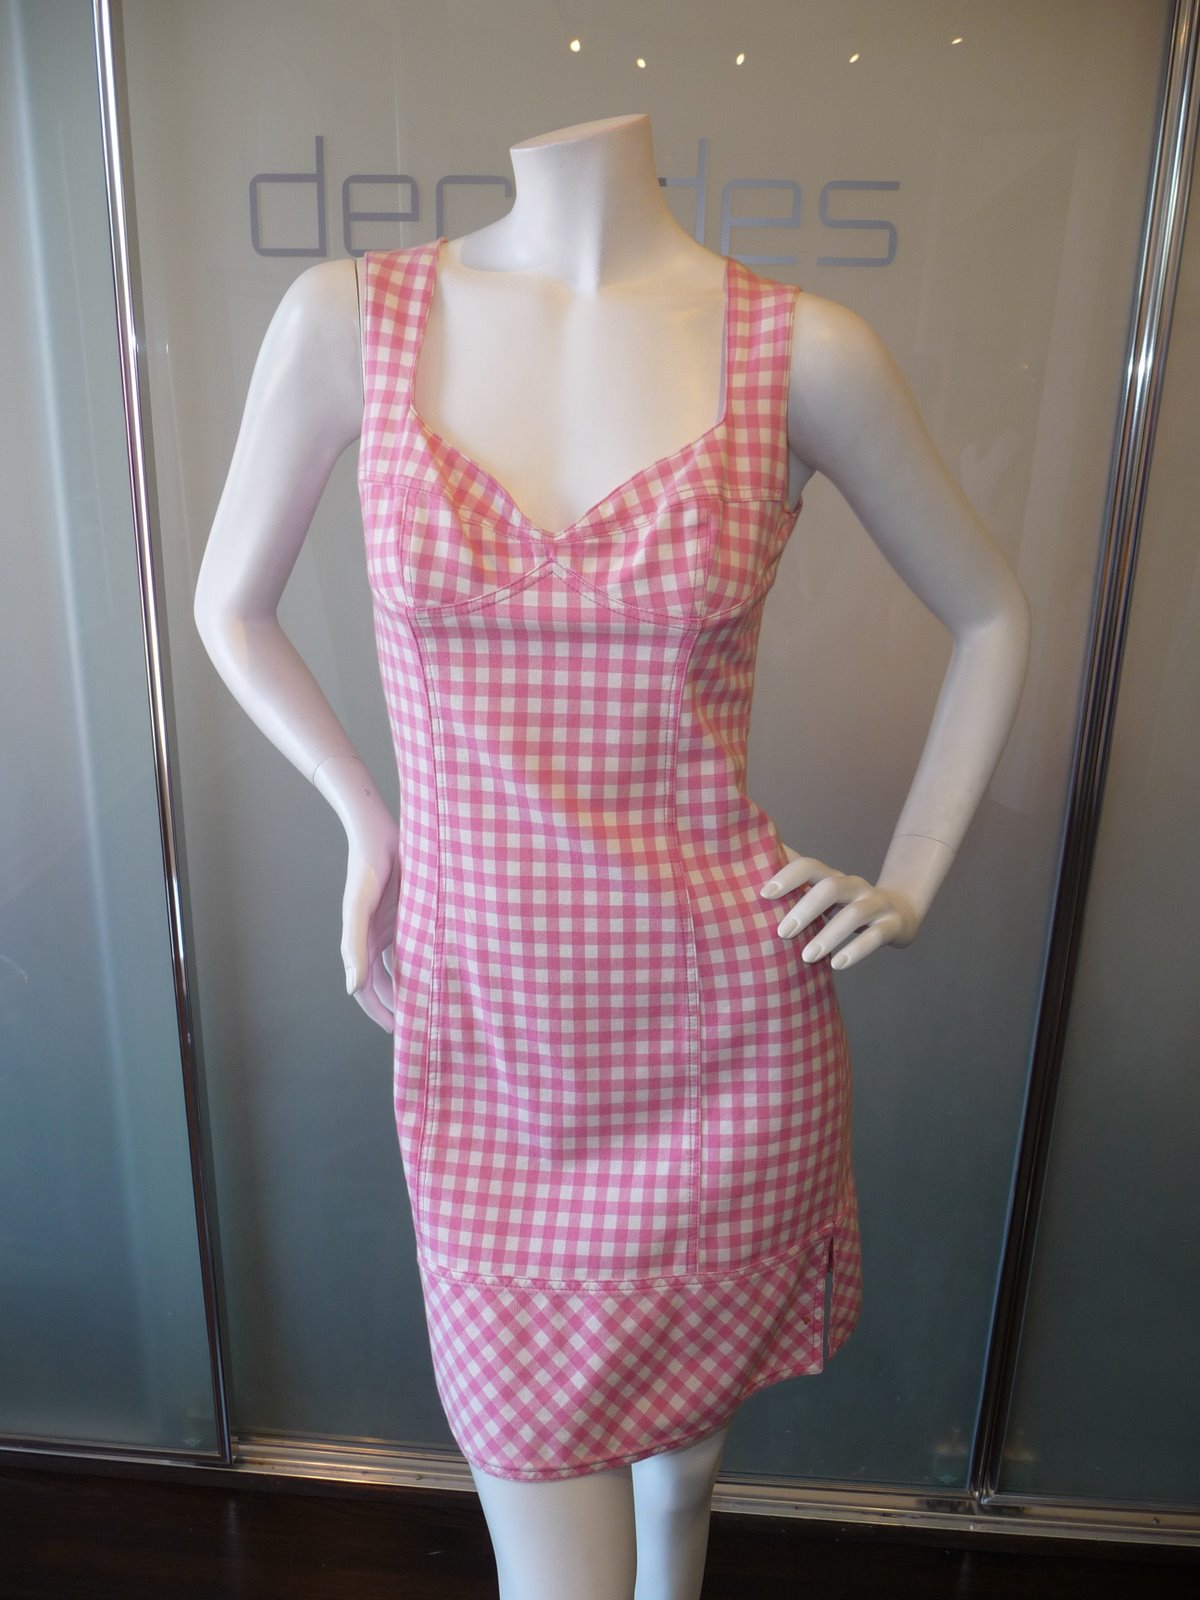 [EMANUEL+UNGARO+PINK+GINGHAM+SOLO+DONNA+DRESS+C+LATE+80S+RETIALED+BY+FRED+HEYMAN.JPG.JPG]